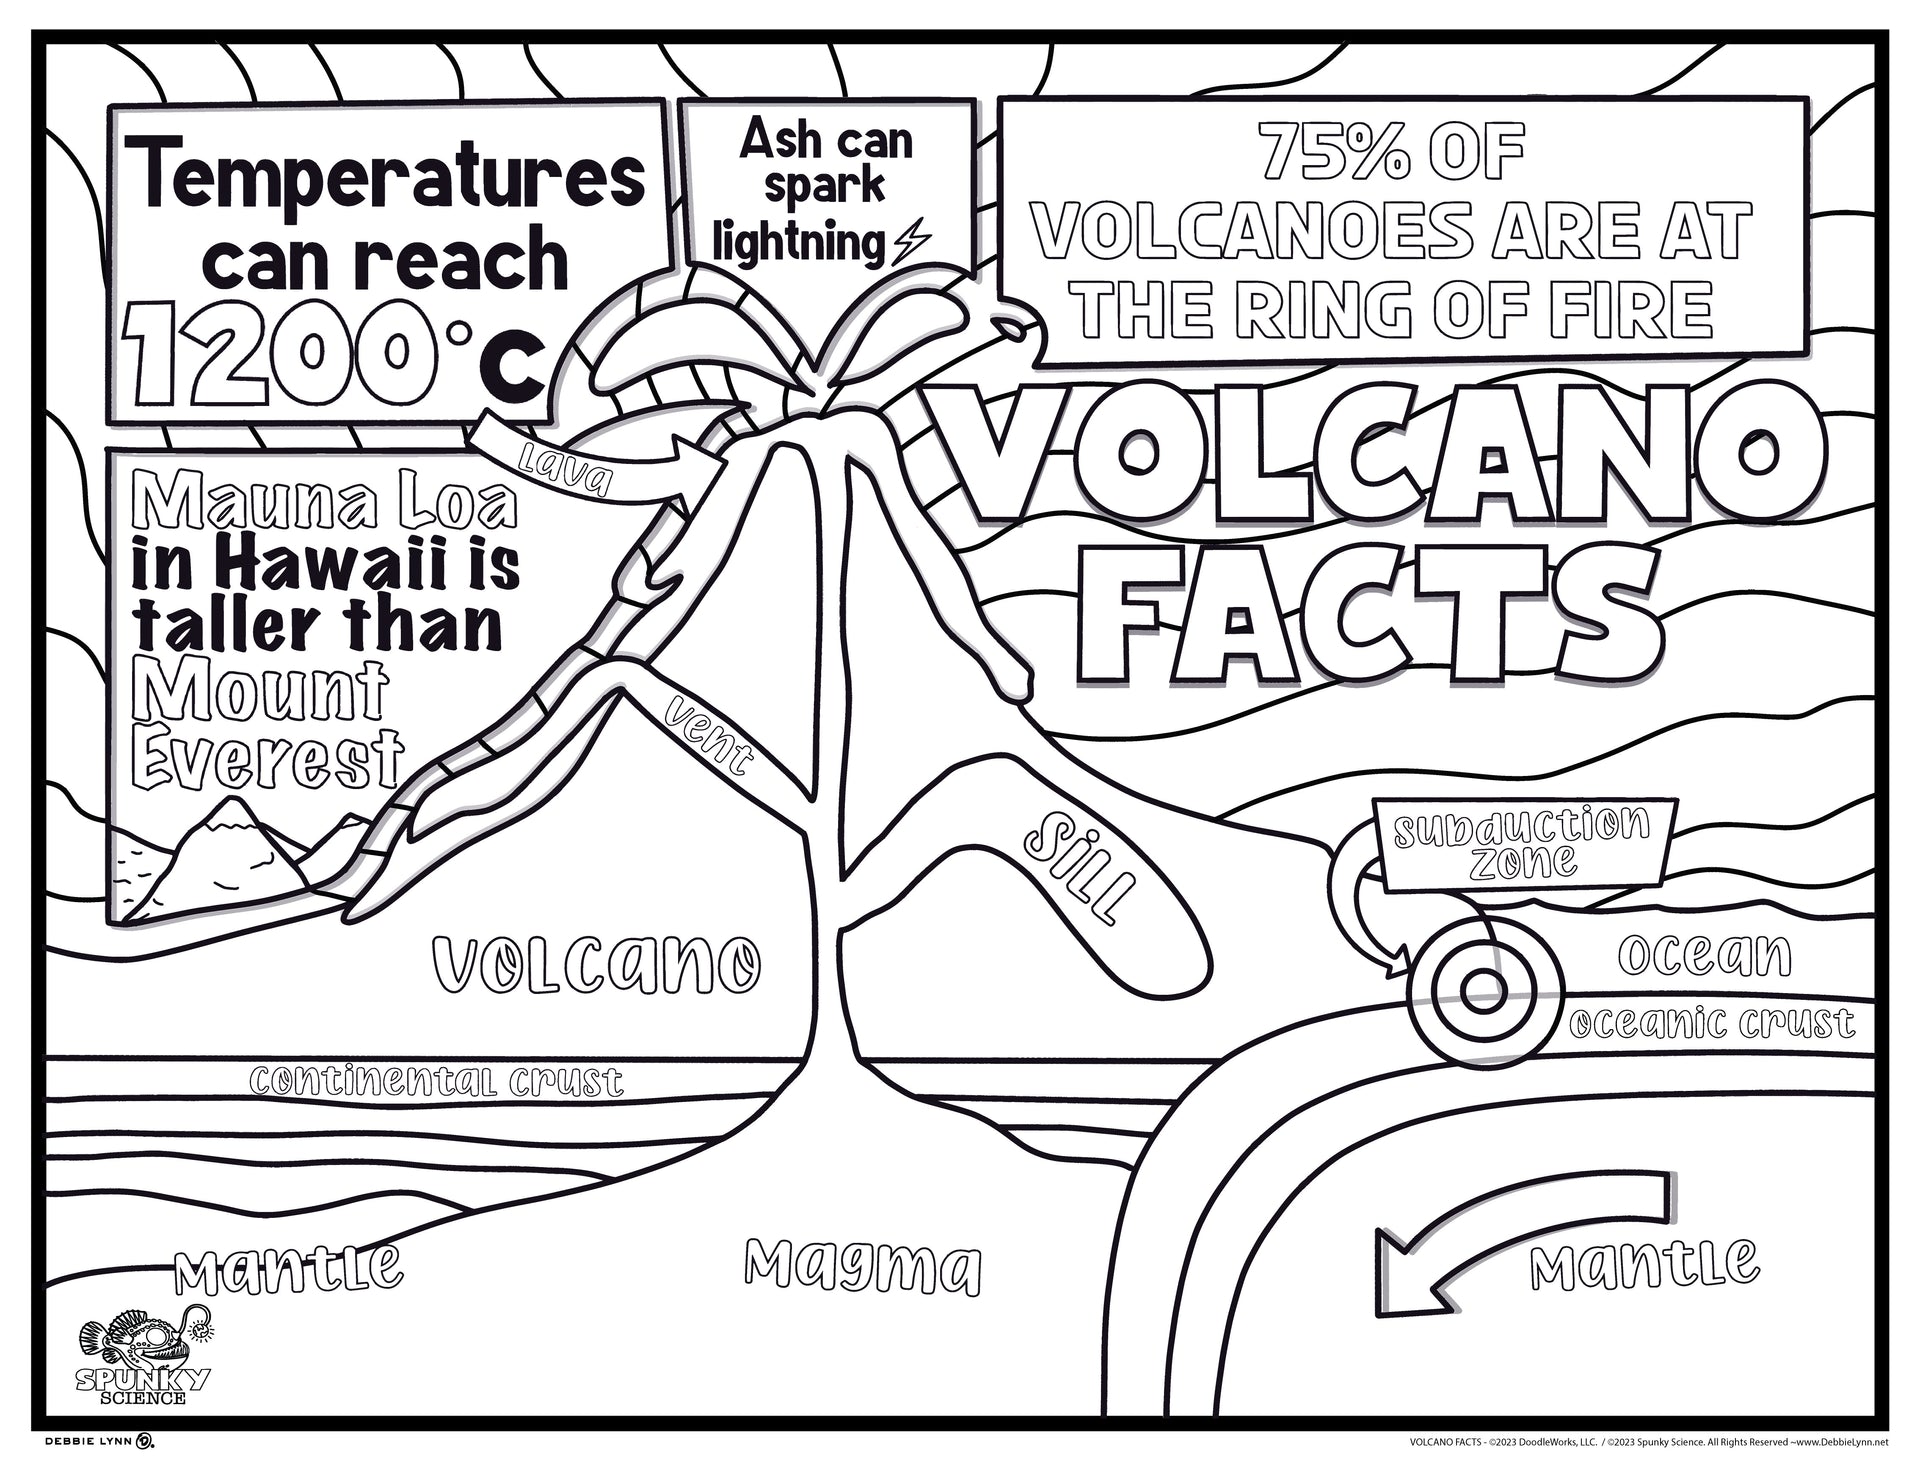 Volcano facts spunky science personalized giant coloring poster x â debbie lynn